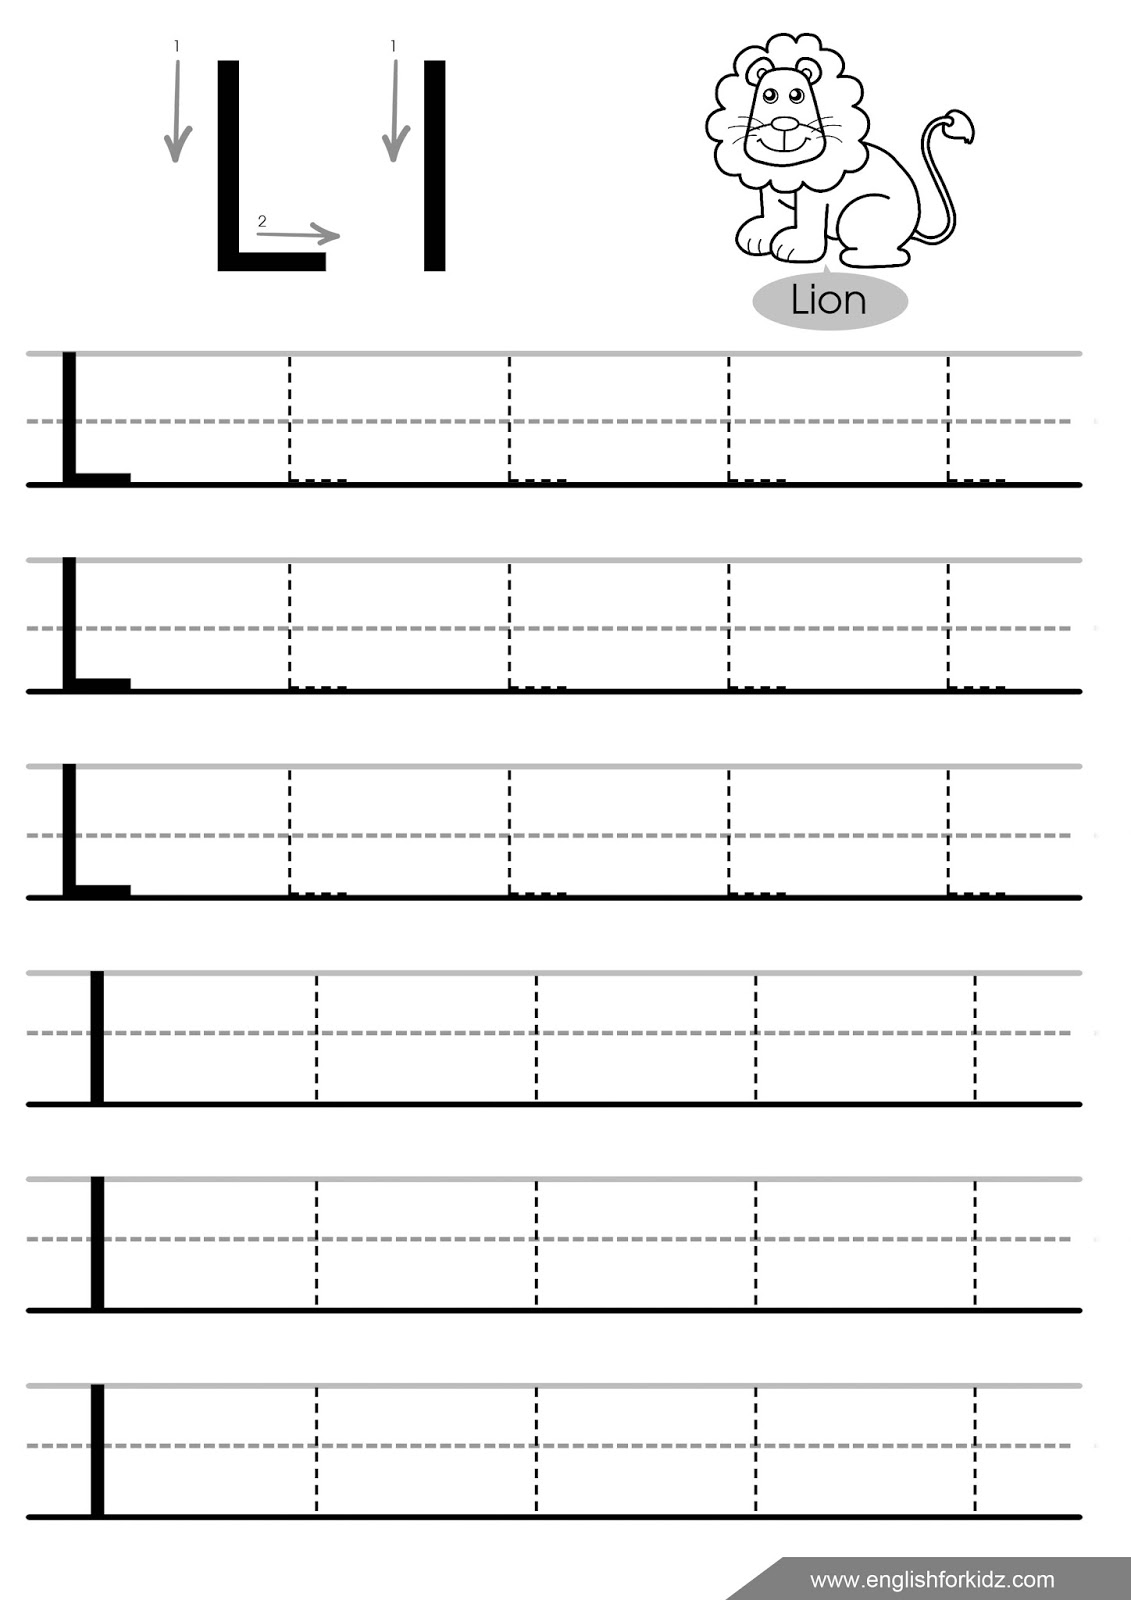 English for Kids Step by Step Letter Tracing Worksheets (Letters K T)